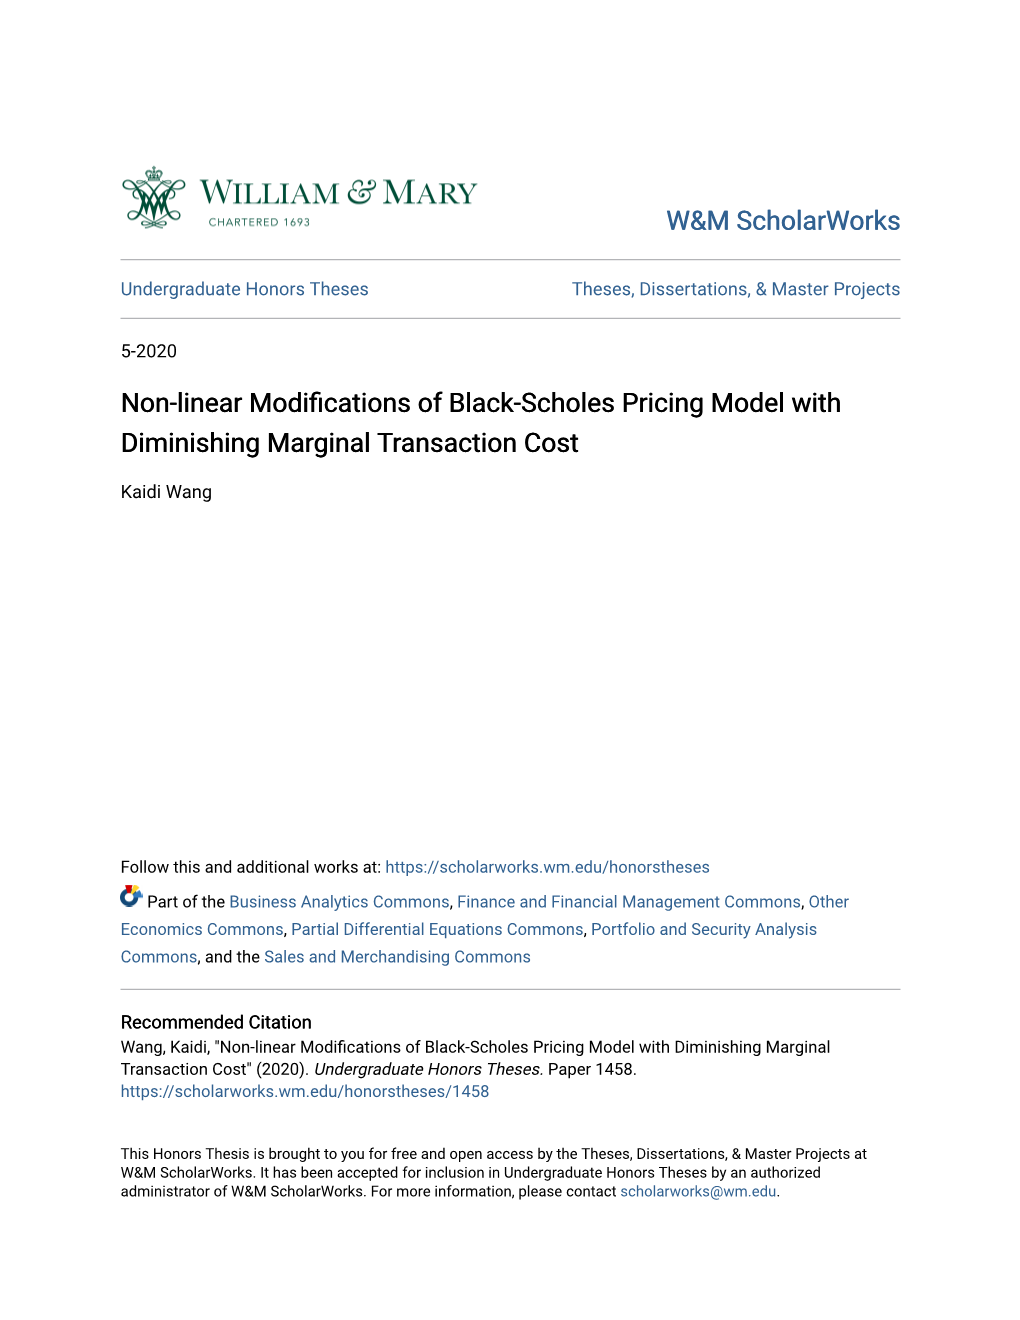 Non-Linear Modifications of Black-Scholes Pricing Model with Diminishing Marginal Transaction Cost